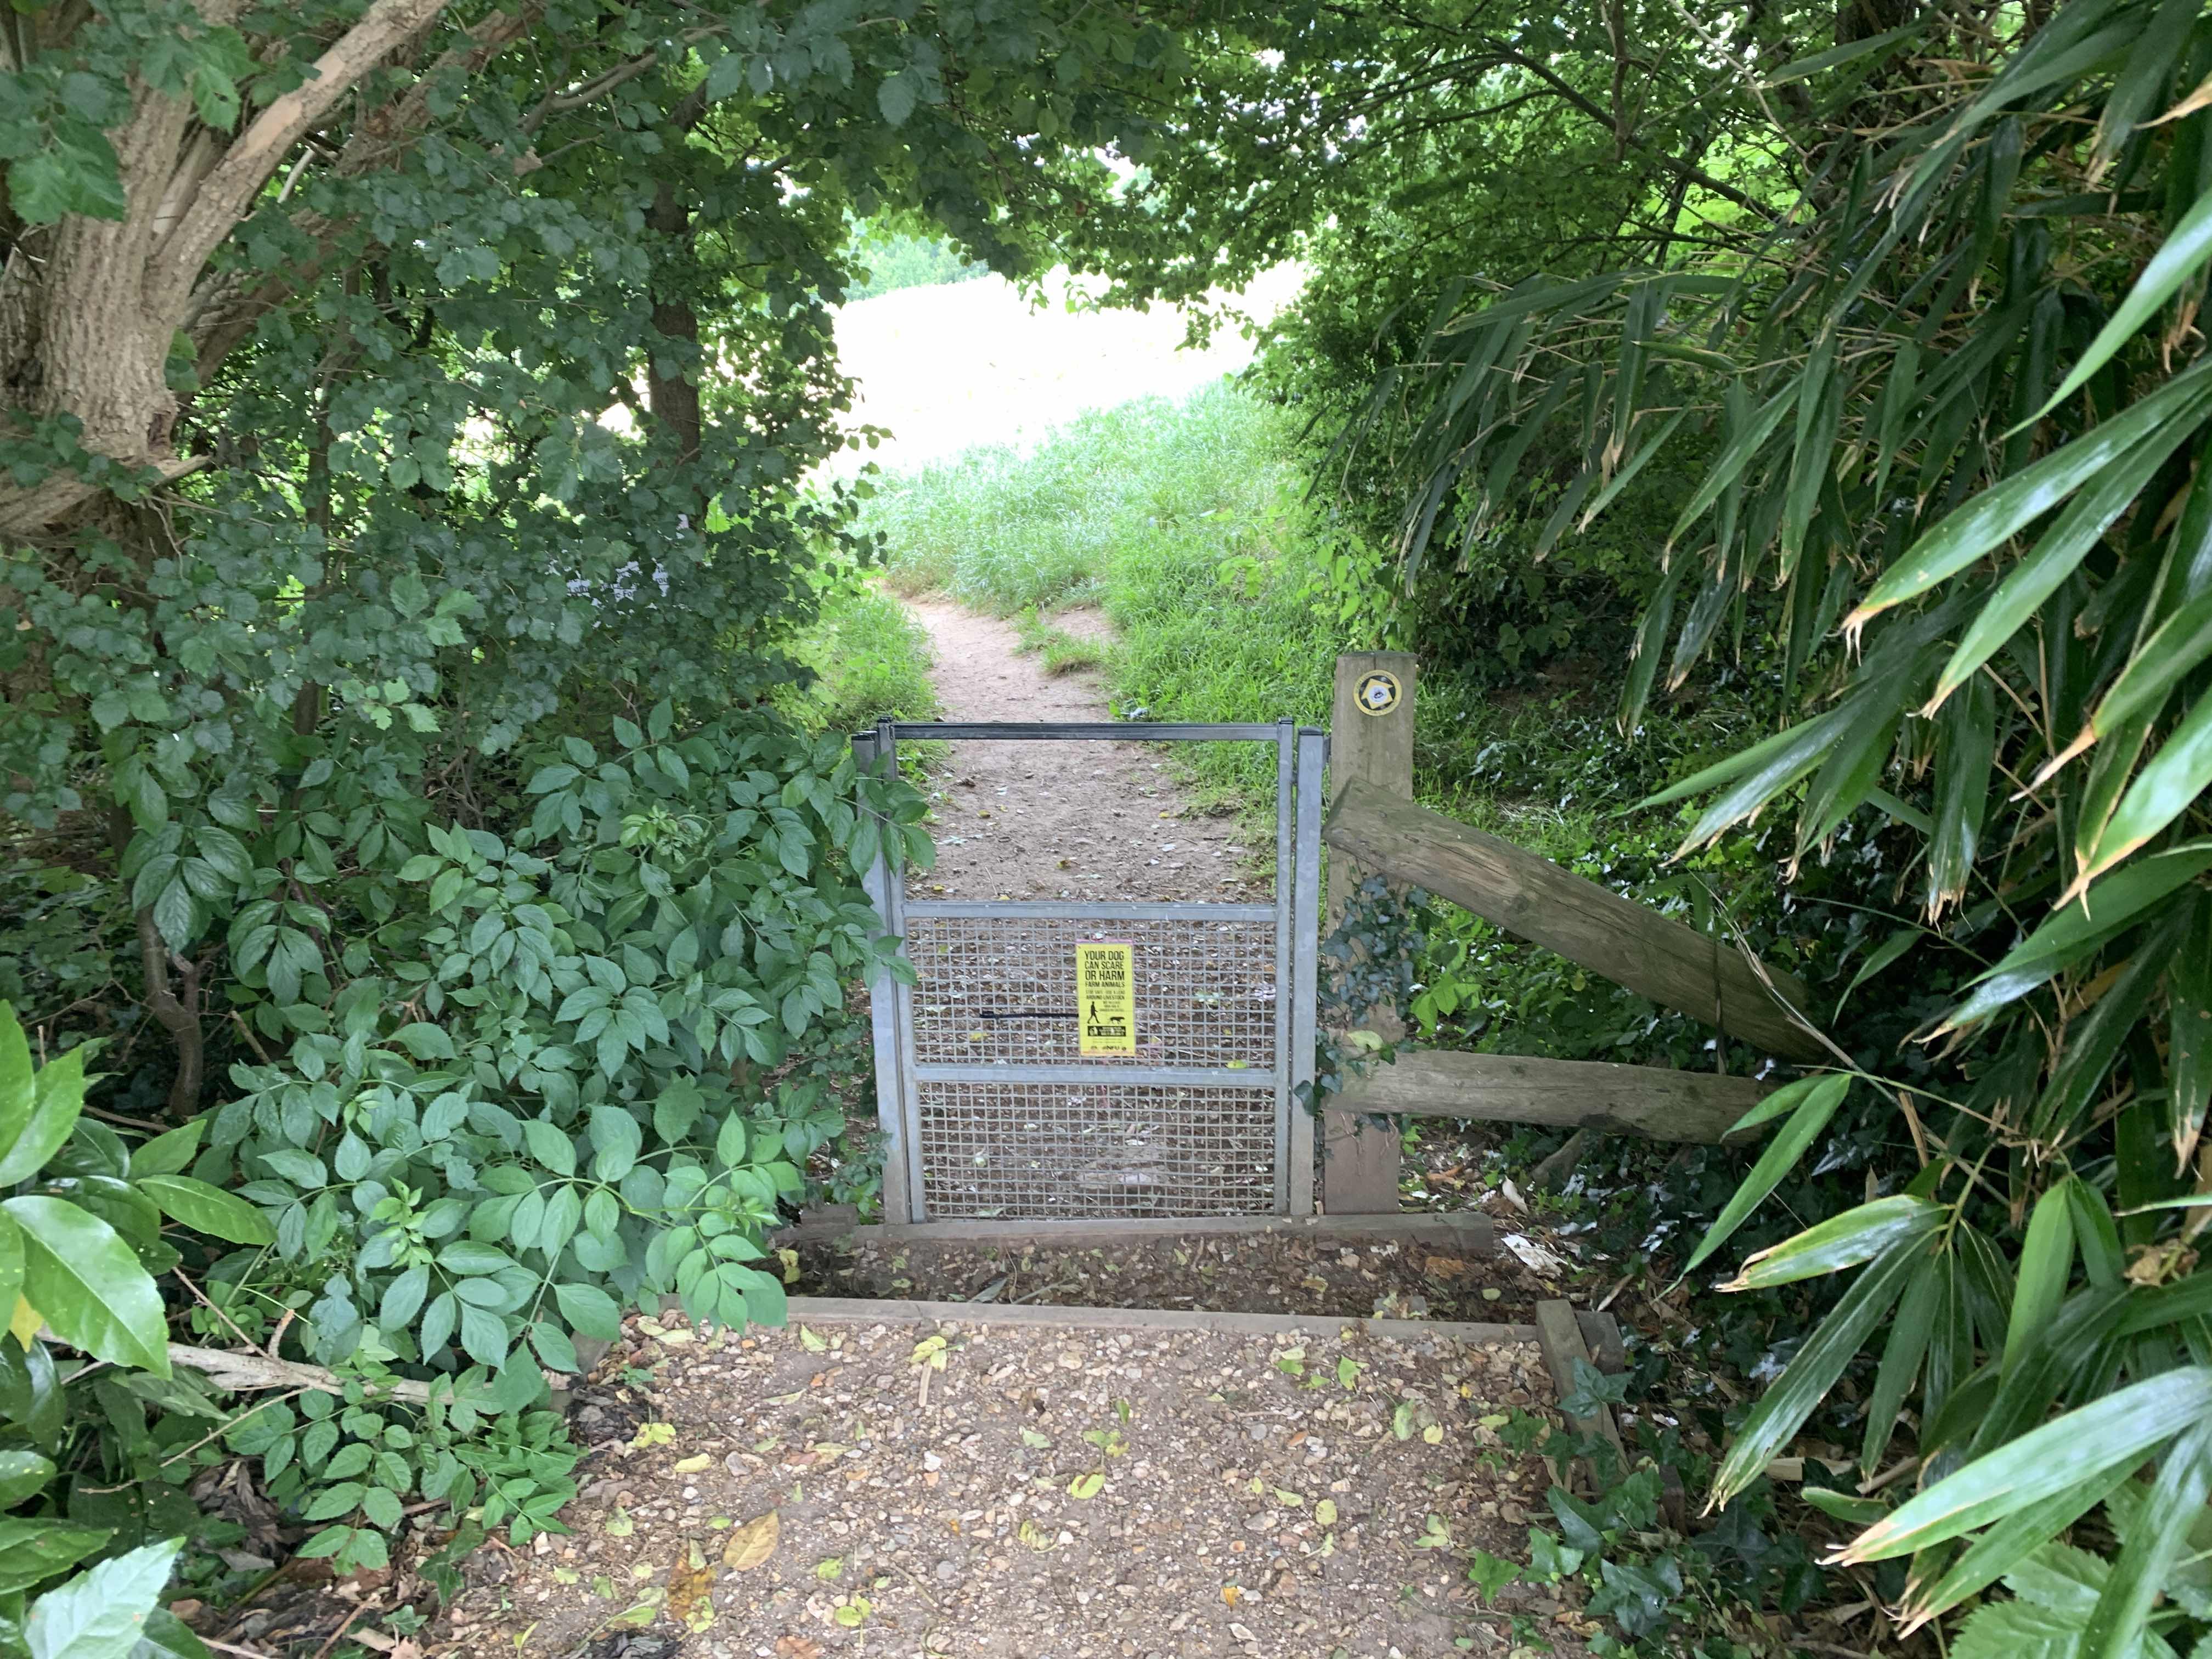 Go through the gate and into the field